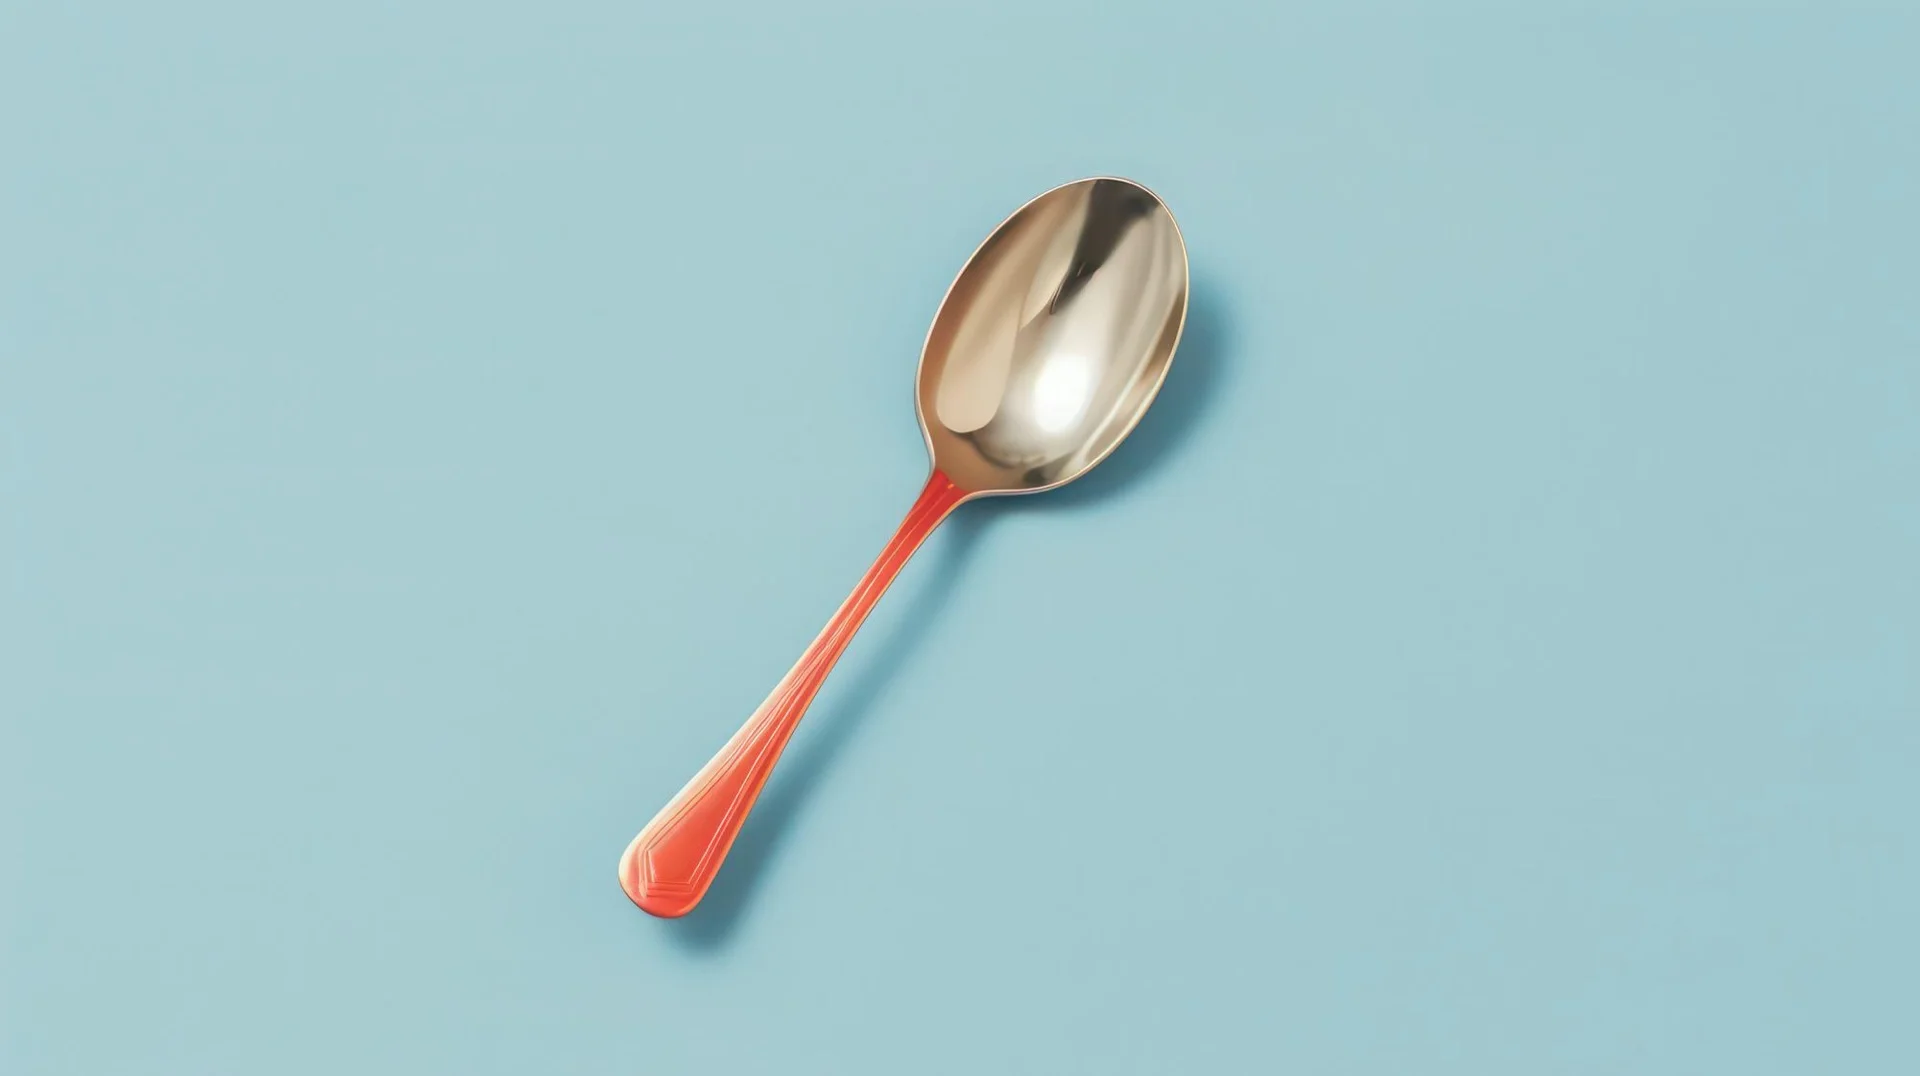 What Is a Teaspoon?